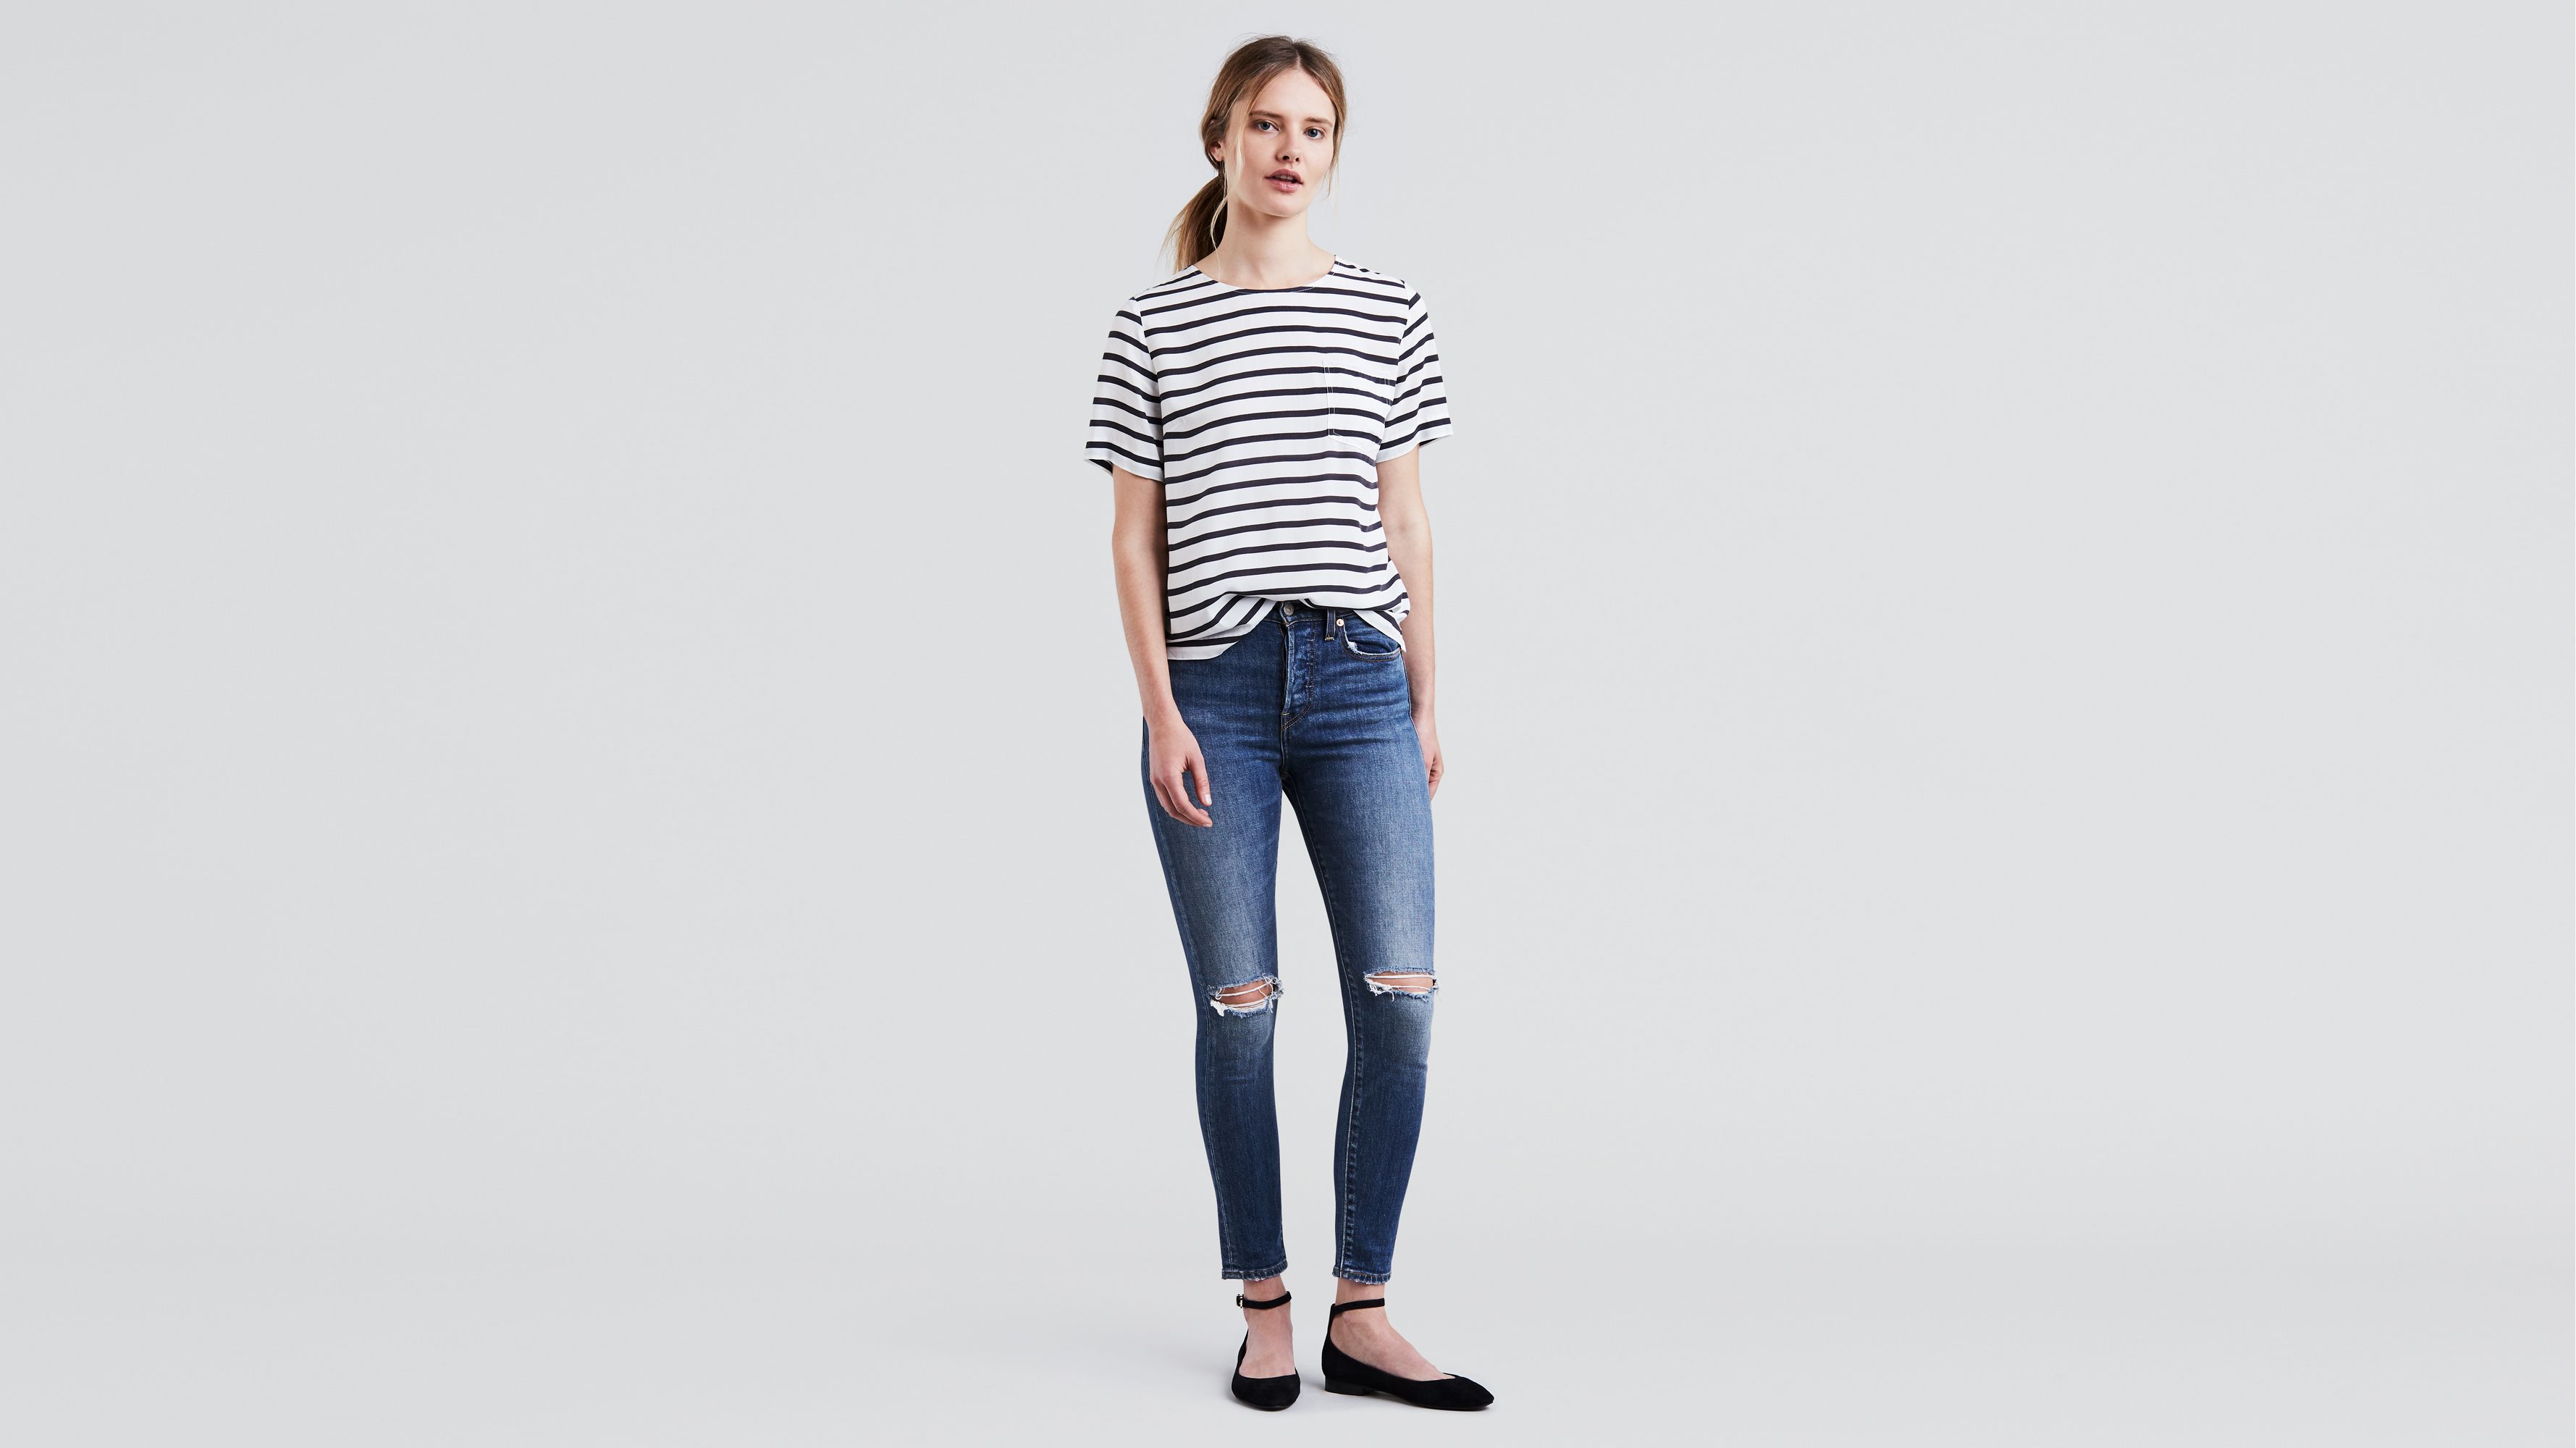 levi's wedgie fit skinny